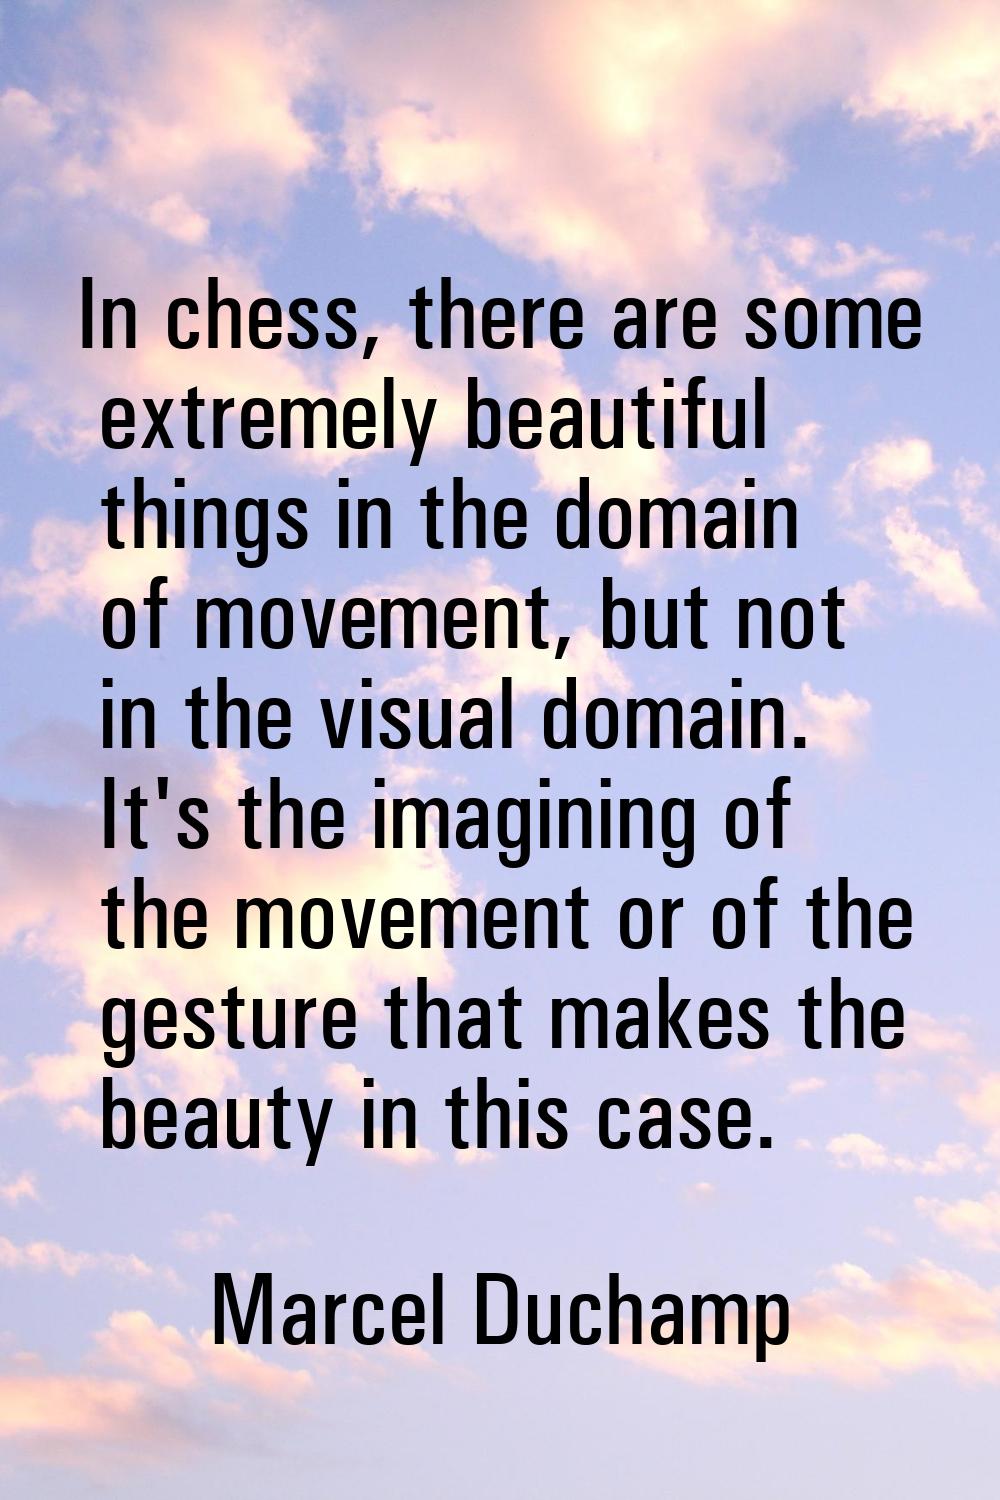 In chess, there are some extremely beautiful things in the domain of movement, but not in the visua